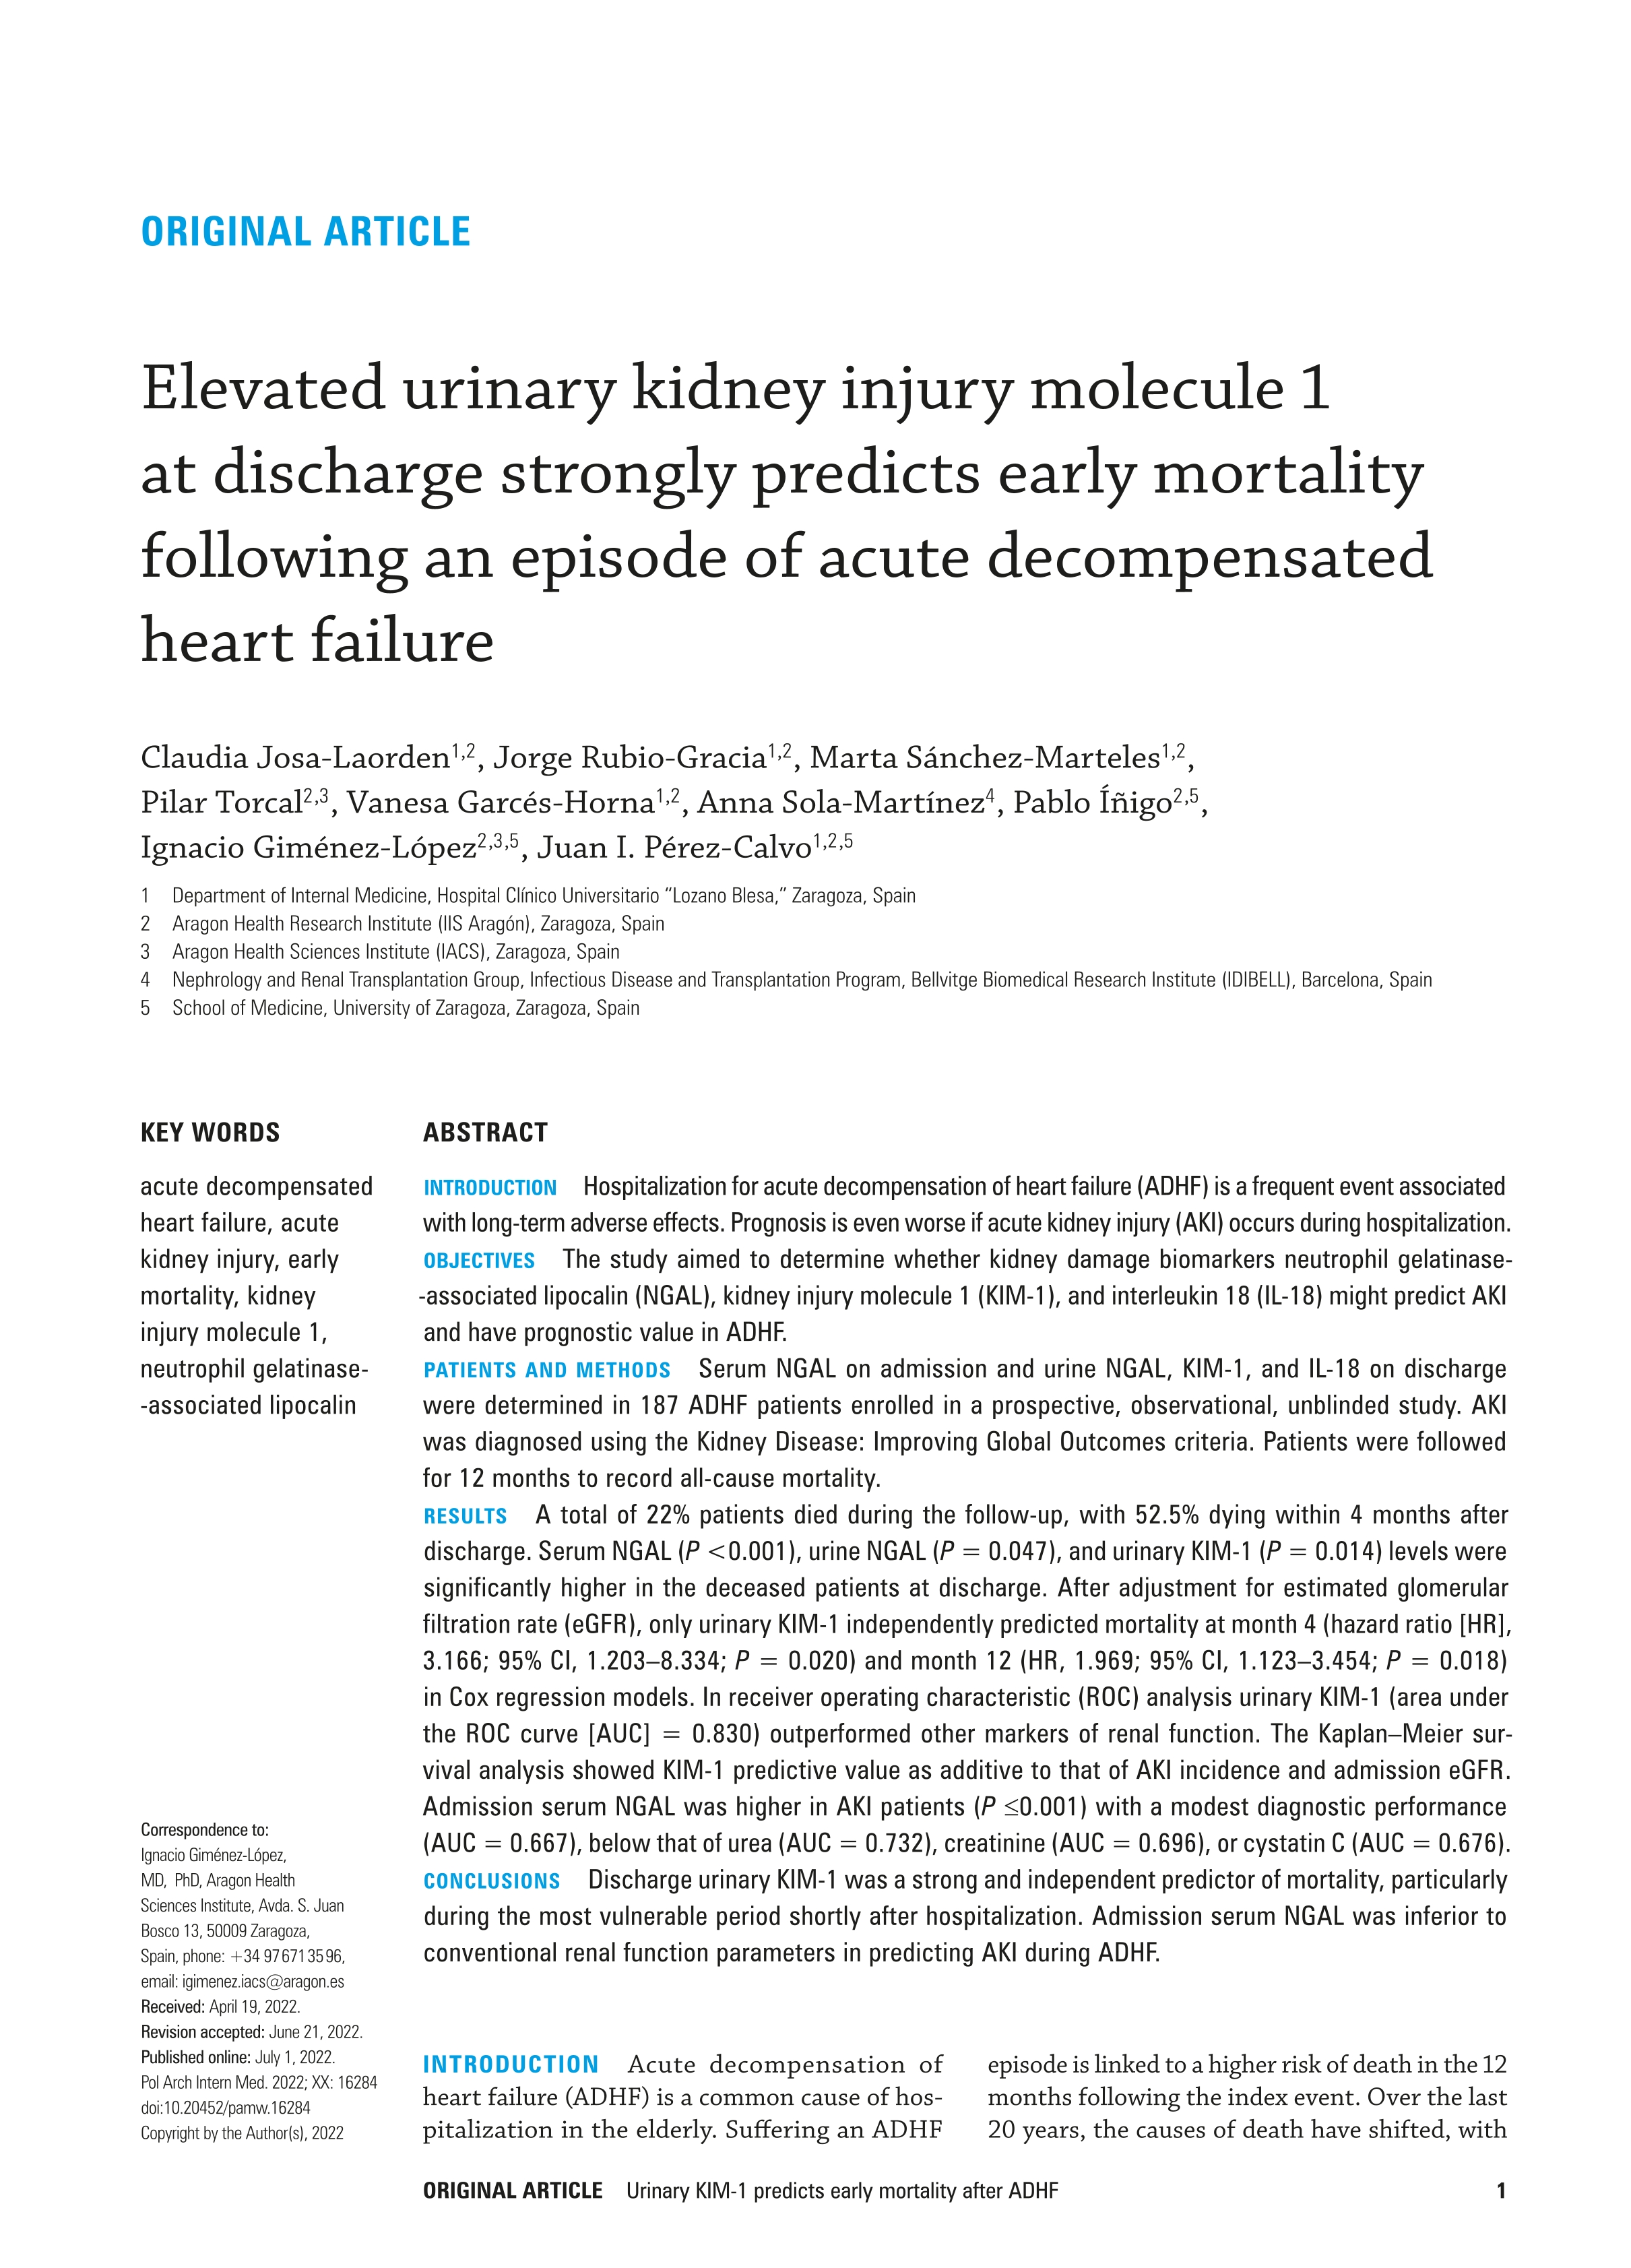 Elevated urinary Kidney Injury Molecule 1 (KIM-1) at discharge strongly predicts early mortality following an episode of acute decompensated heart failure